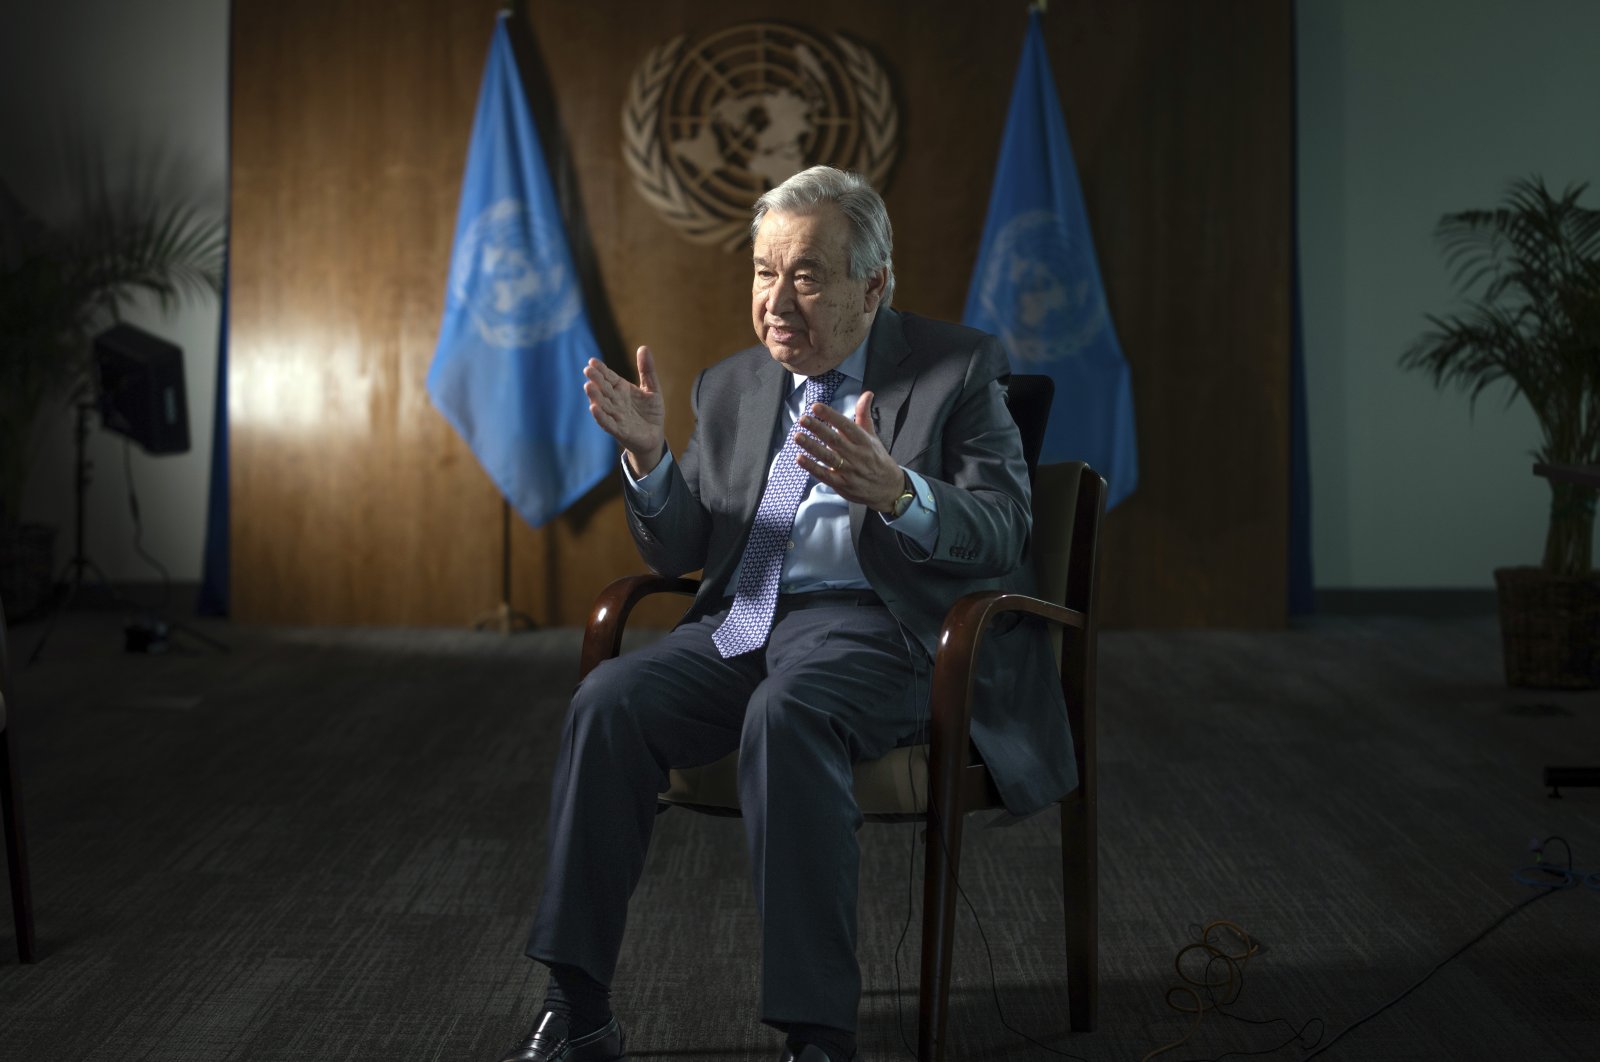 United Nations Secretary-General Antonio Guterres speaks during interview at the United Nations Headquarters, in New York, U.S., Jan. 20, 2022. (AP Photo)